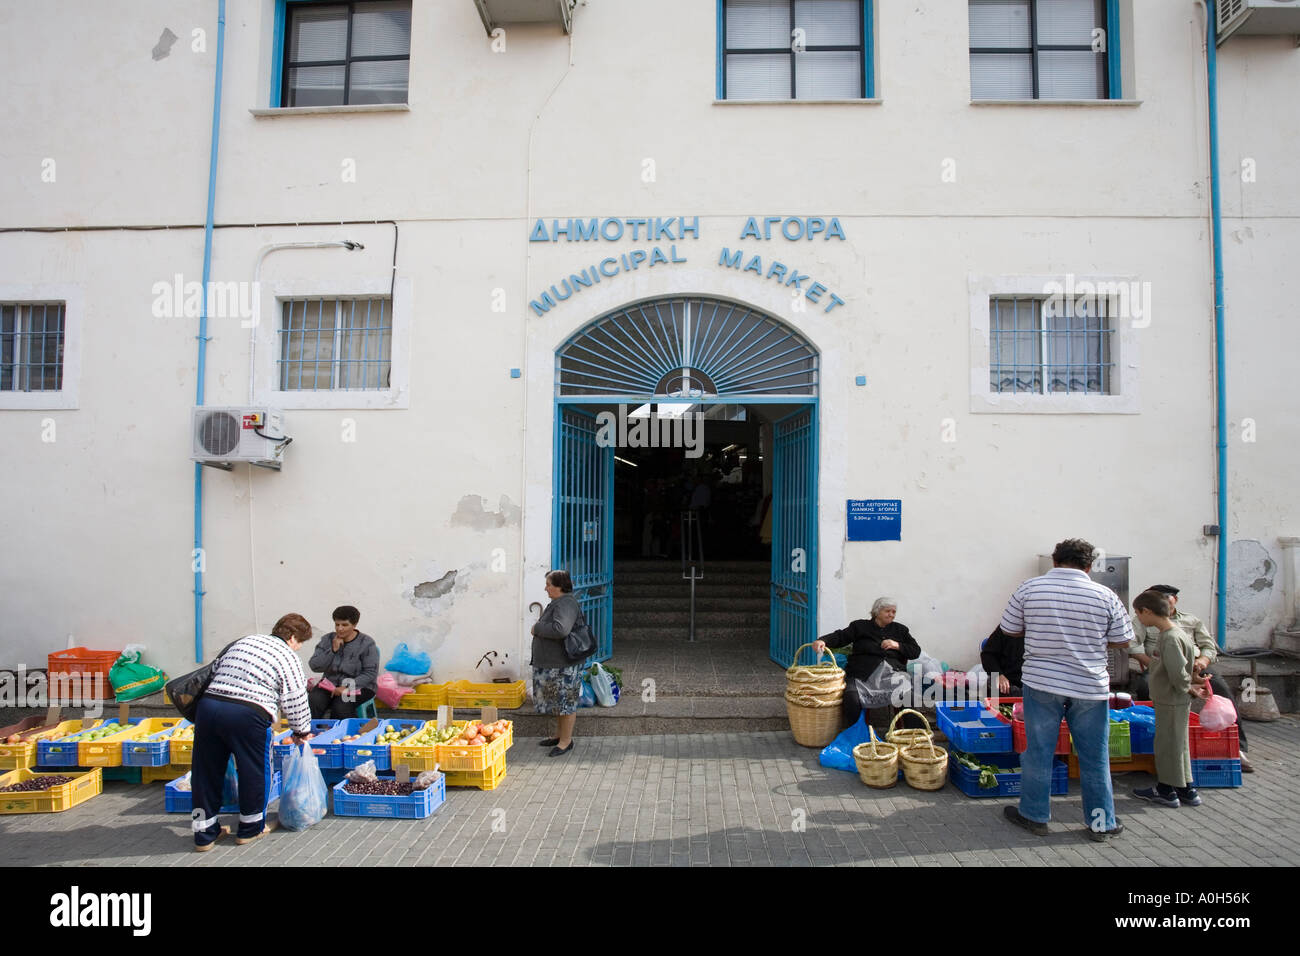 THE ENTRANCE TO THE INDOOR MUNICIPAL MARKET IN PAPHOS, CYPRUS, WITH MARKET SELLERS FROM THE OUTDOOR PRODUCE MARKET EITHER SIDE Stock Photo